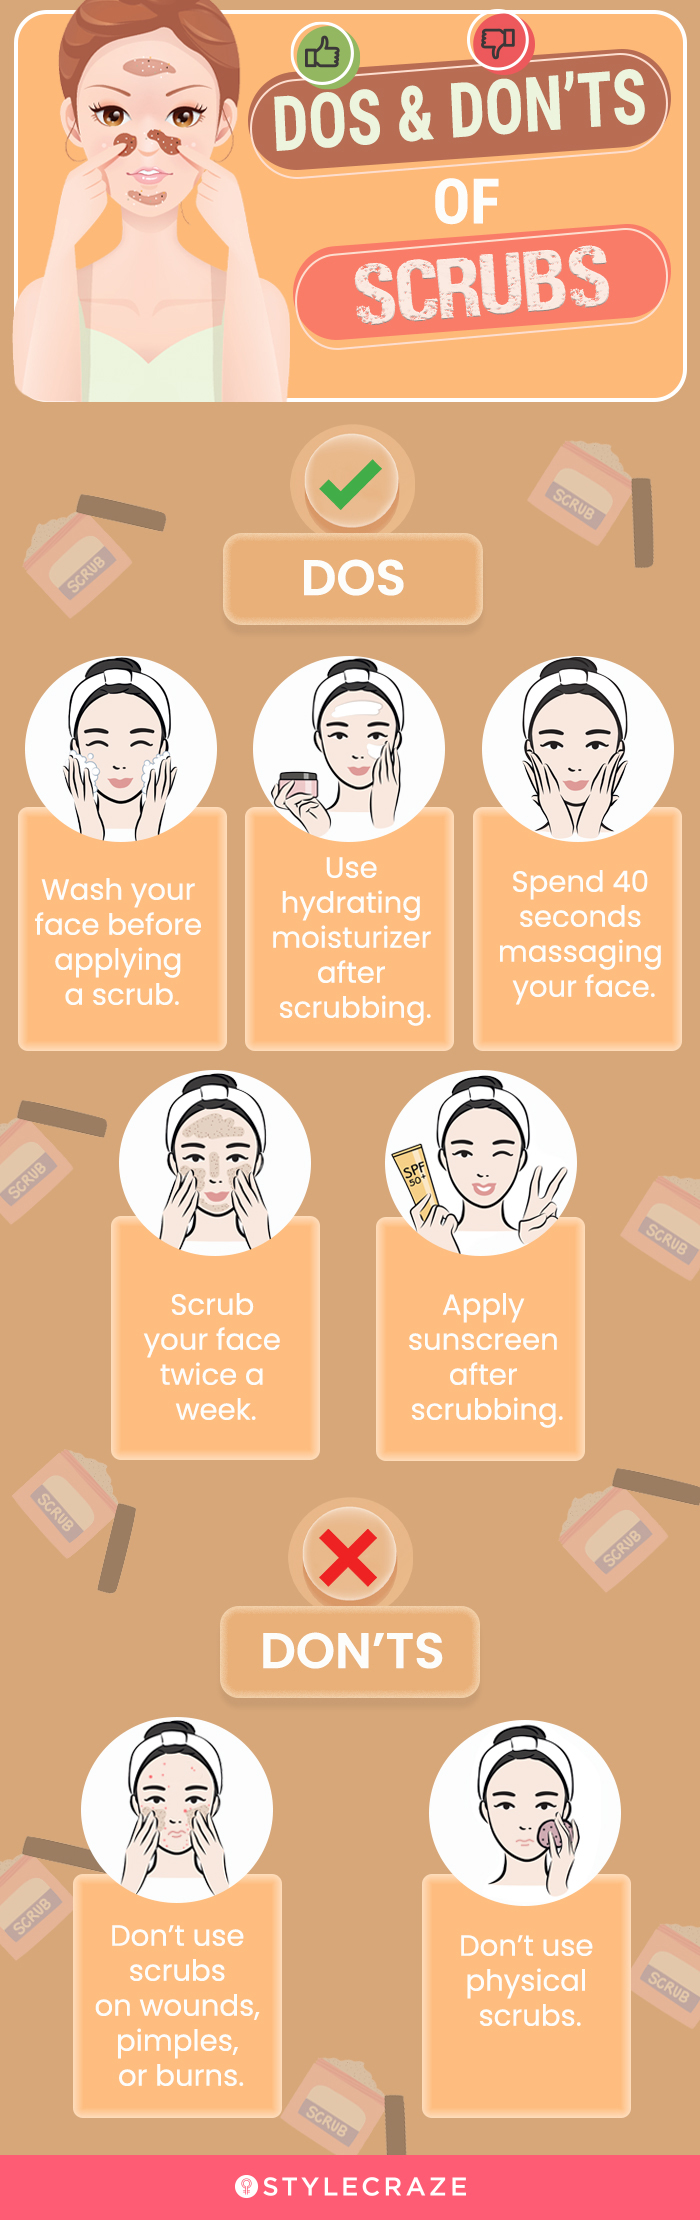 dos & don'ts of scrubs (infographic)